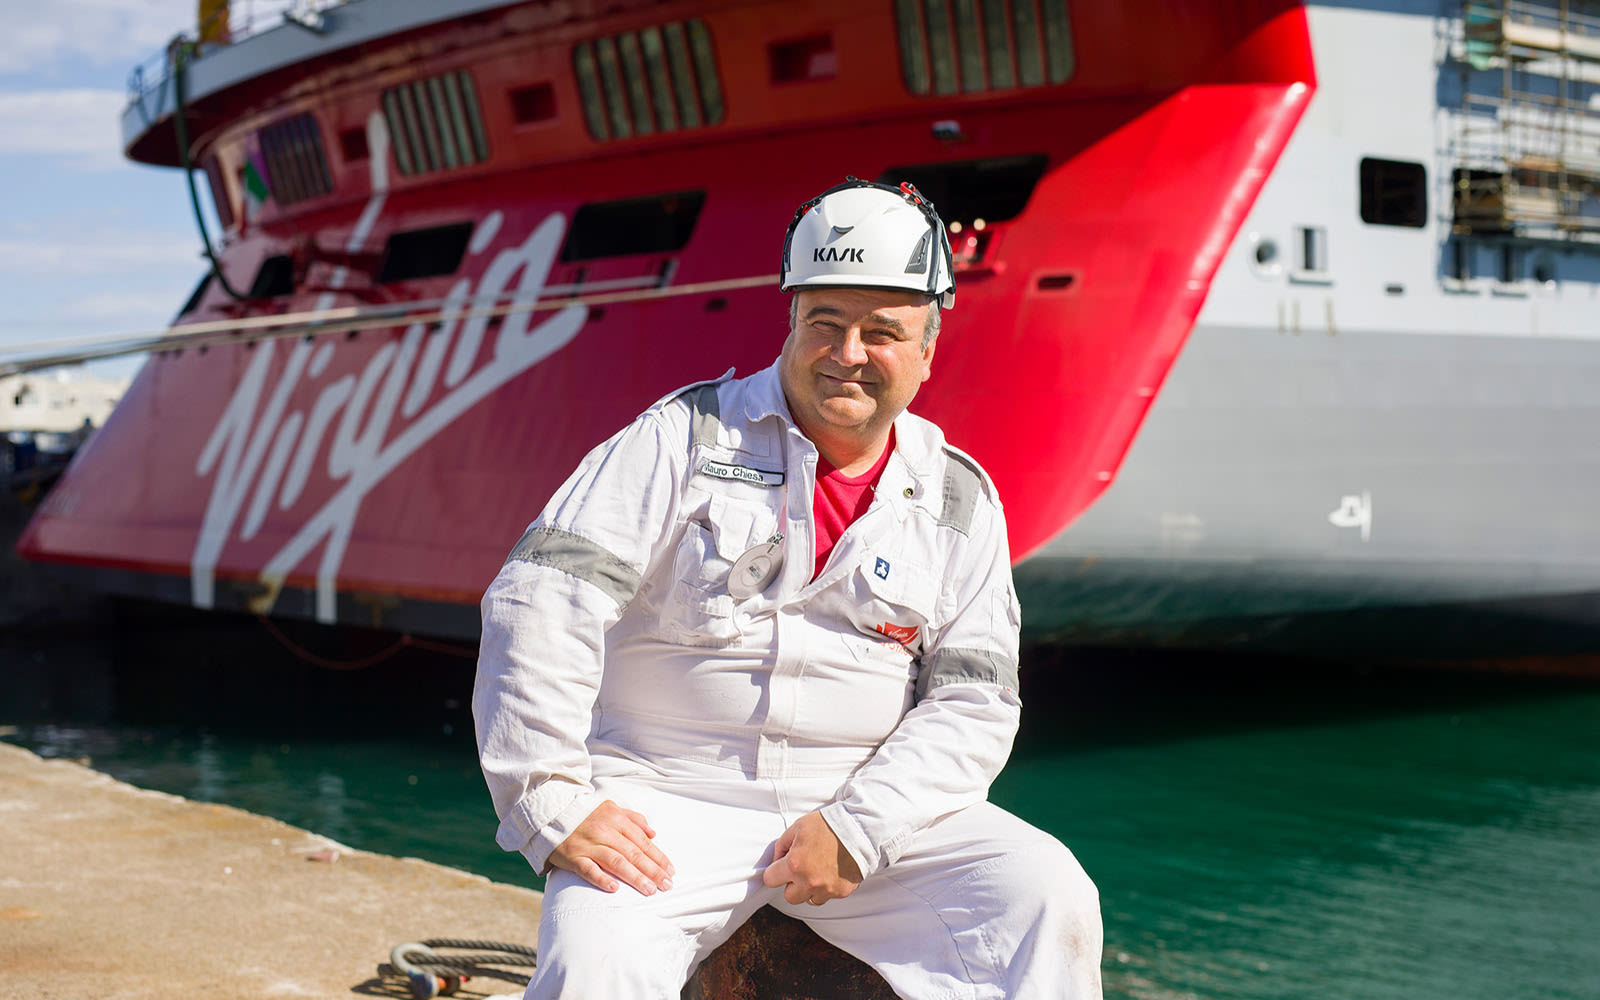 Virgin Voyages crew member - Mauro Chiesa - in front of the Scarlet Lady